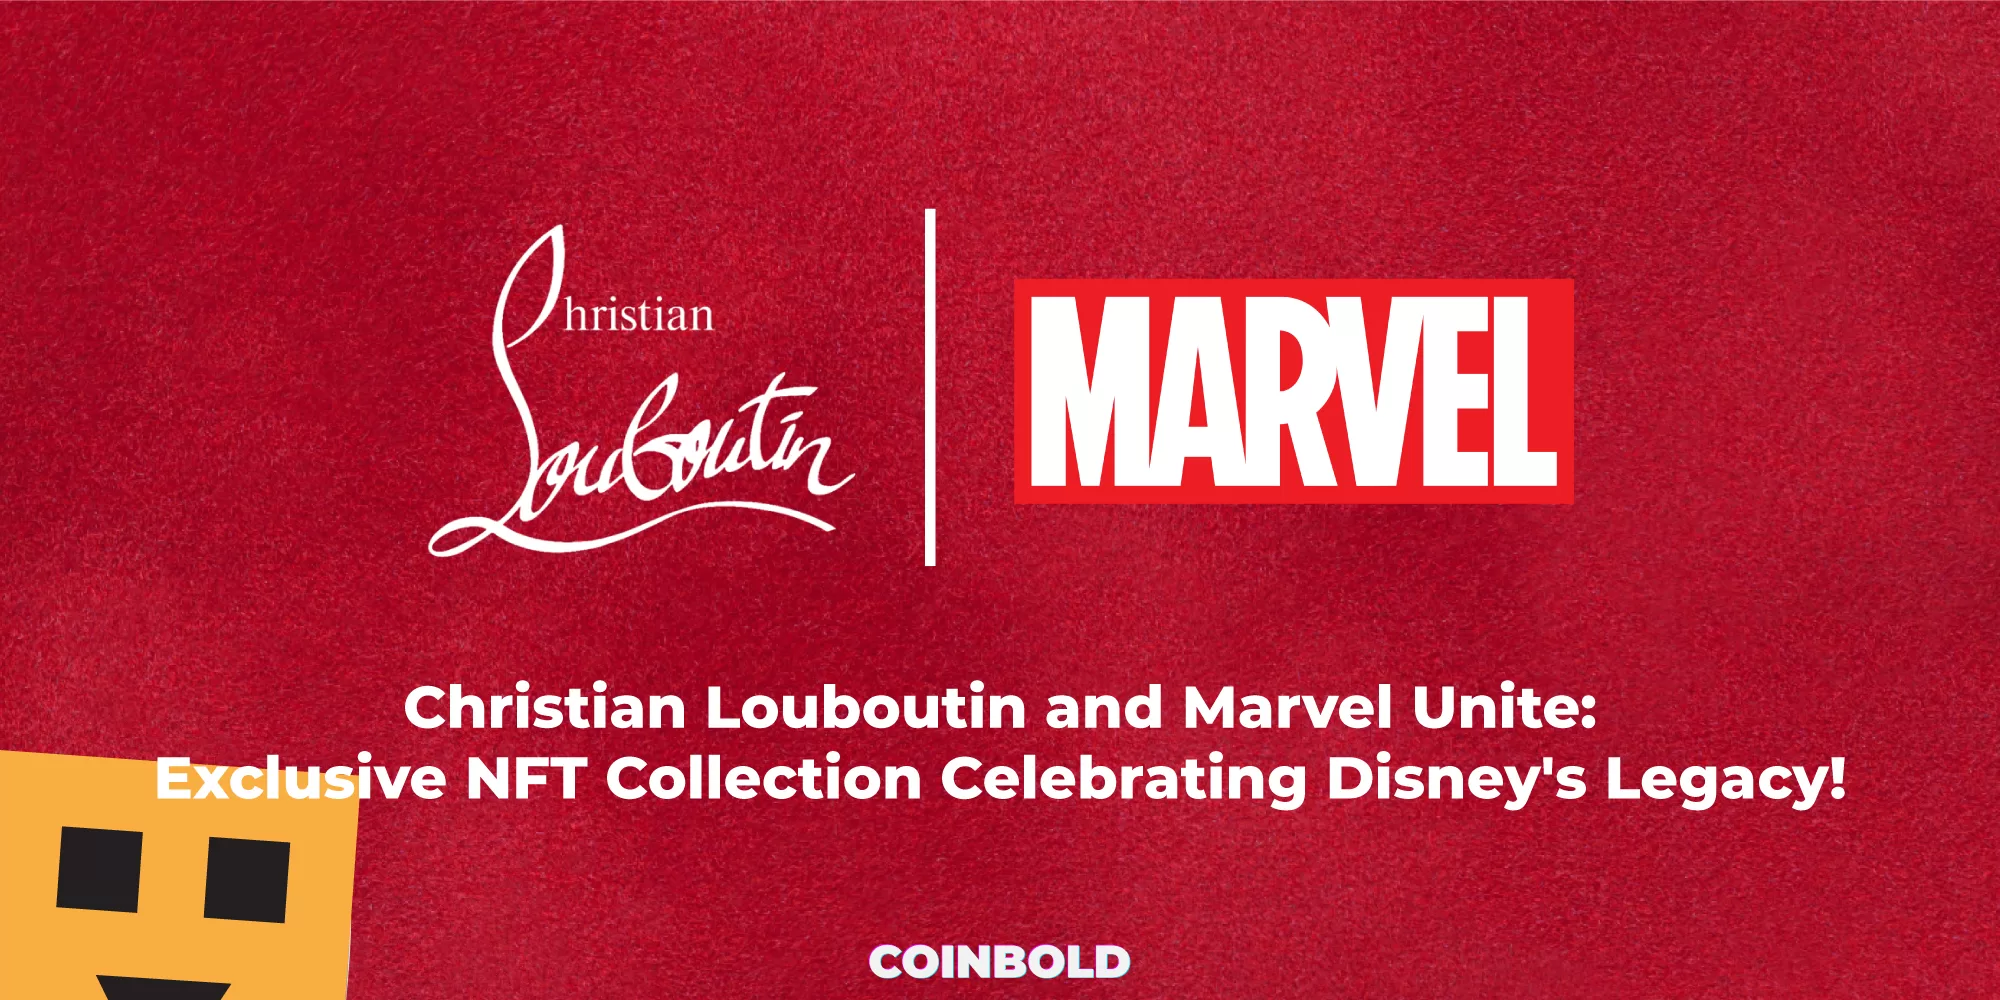 Christian Louboutin and Marvel Unite Exclusive NFT Collection Celebrating Disney's Legacy!